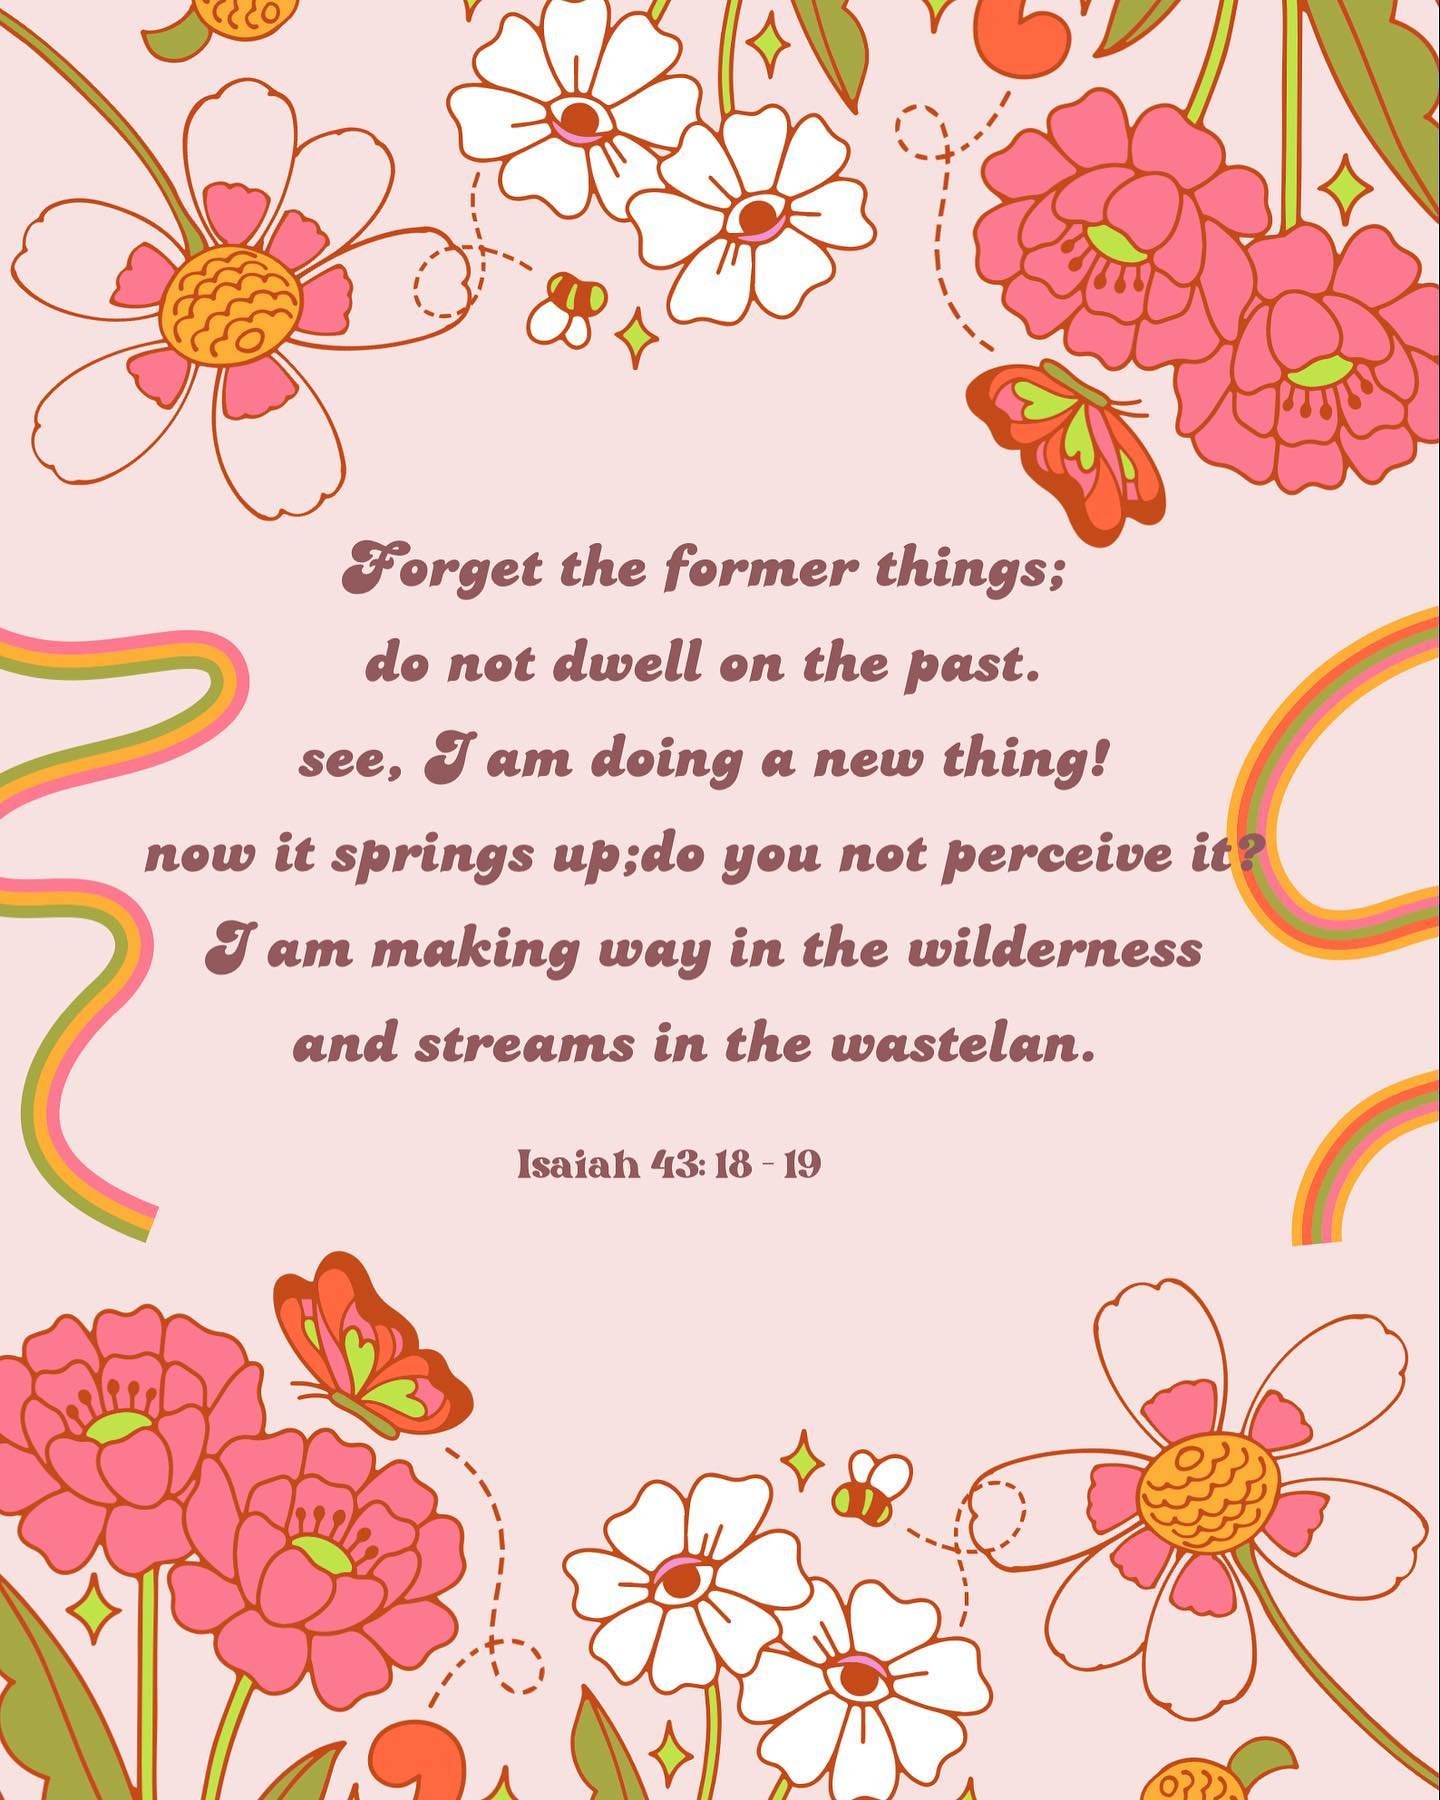 &lsquo;Forget the former things;
Don&rsquo;t dwell on the past!
See I am doing a new thing!
Now it springs up; do you not perceive it?
I am making a way in the wilderness
And streams in the wasteland&rsquo; Isaiah 43: 18~19

Sometimes it hard to get 